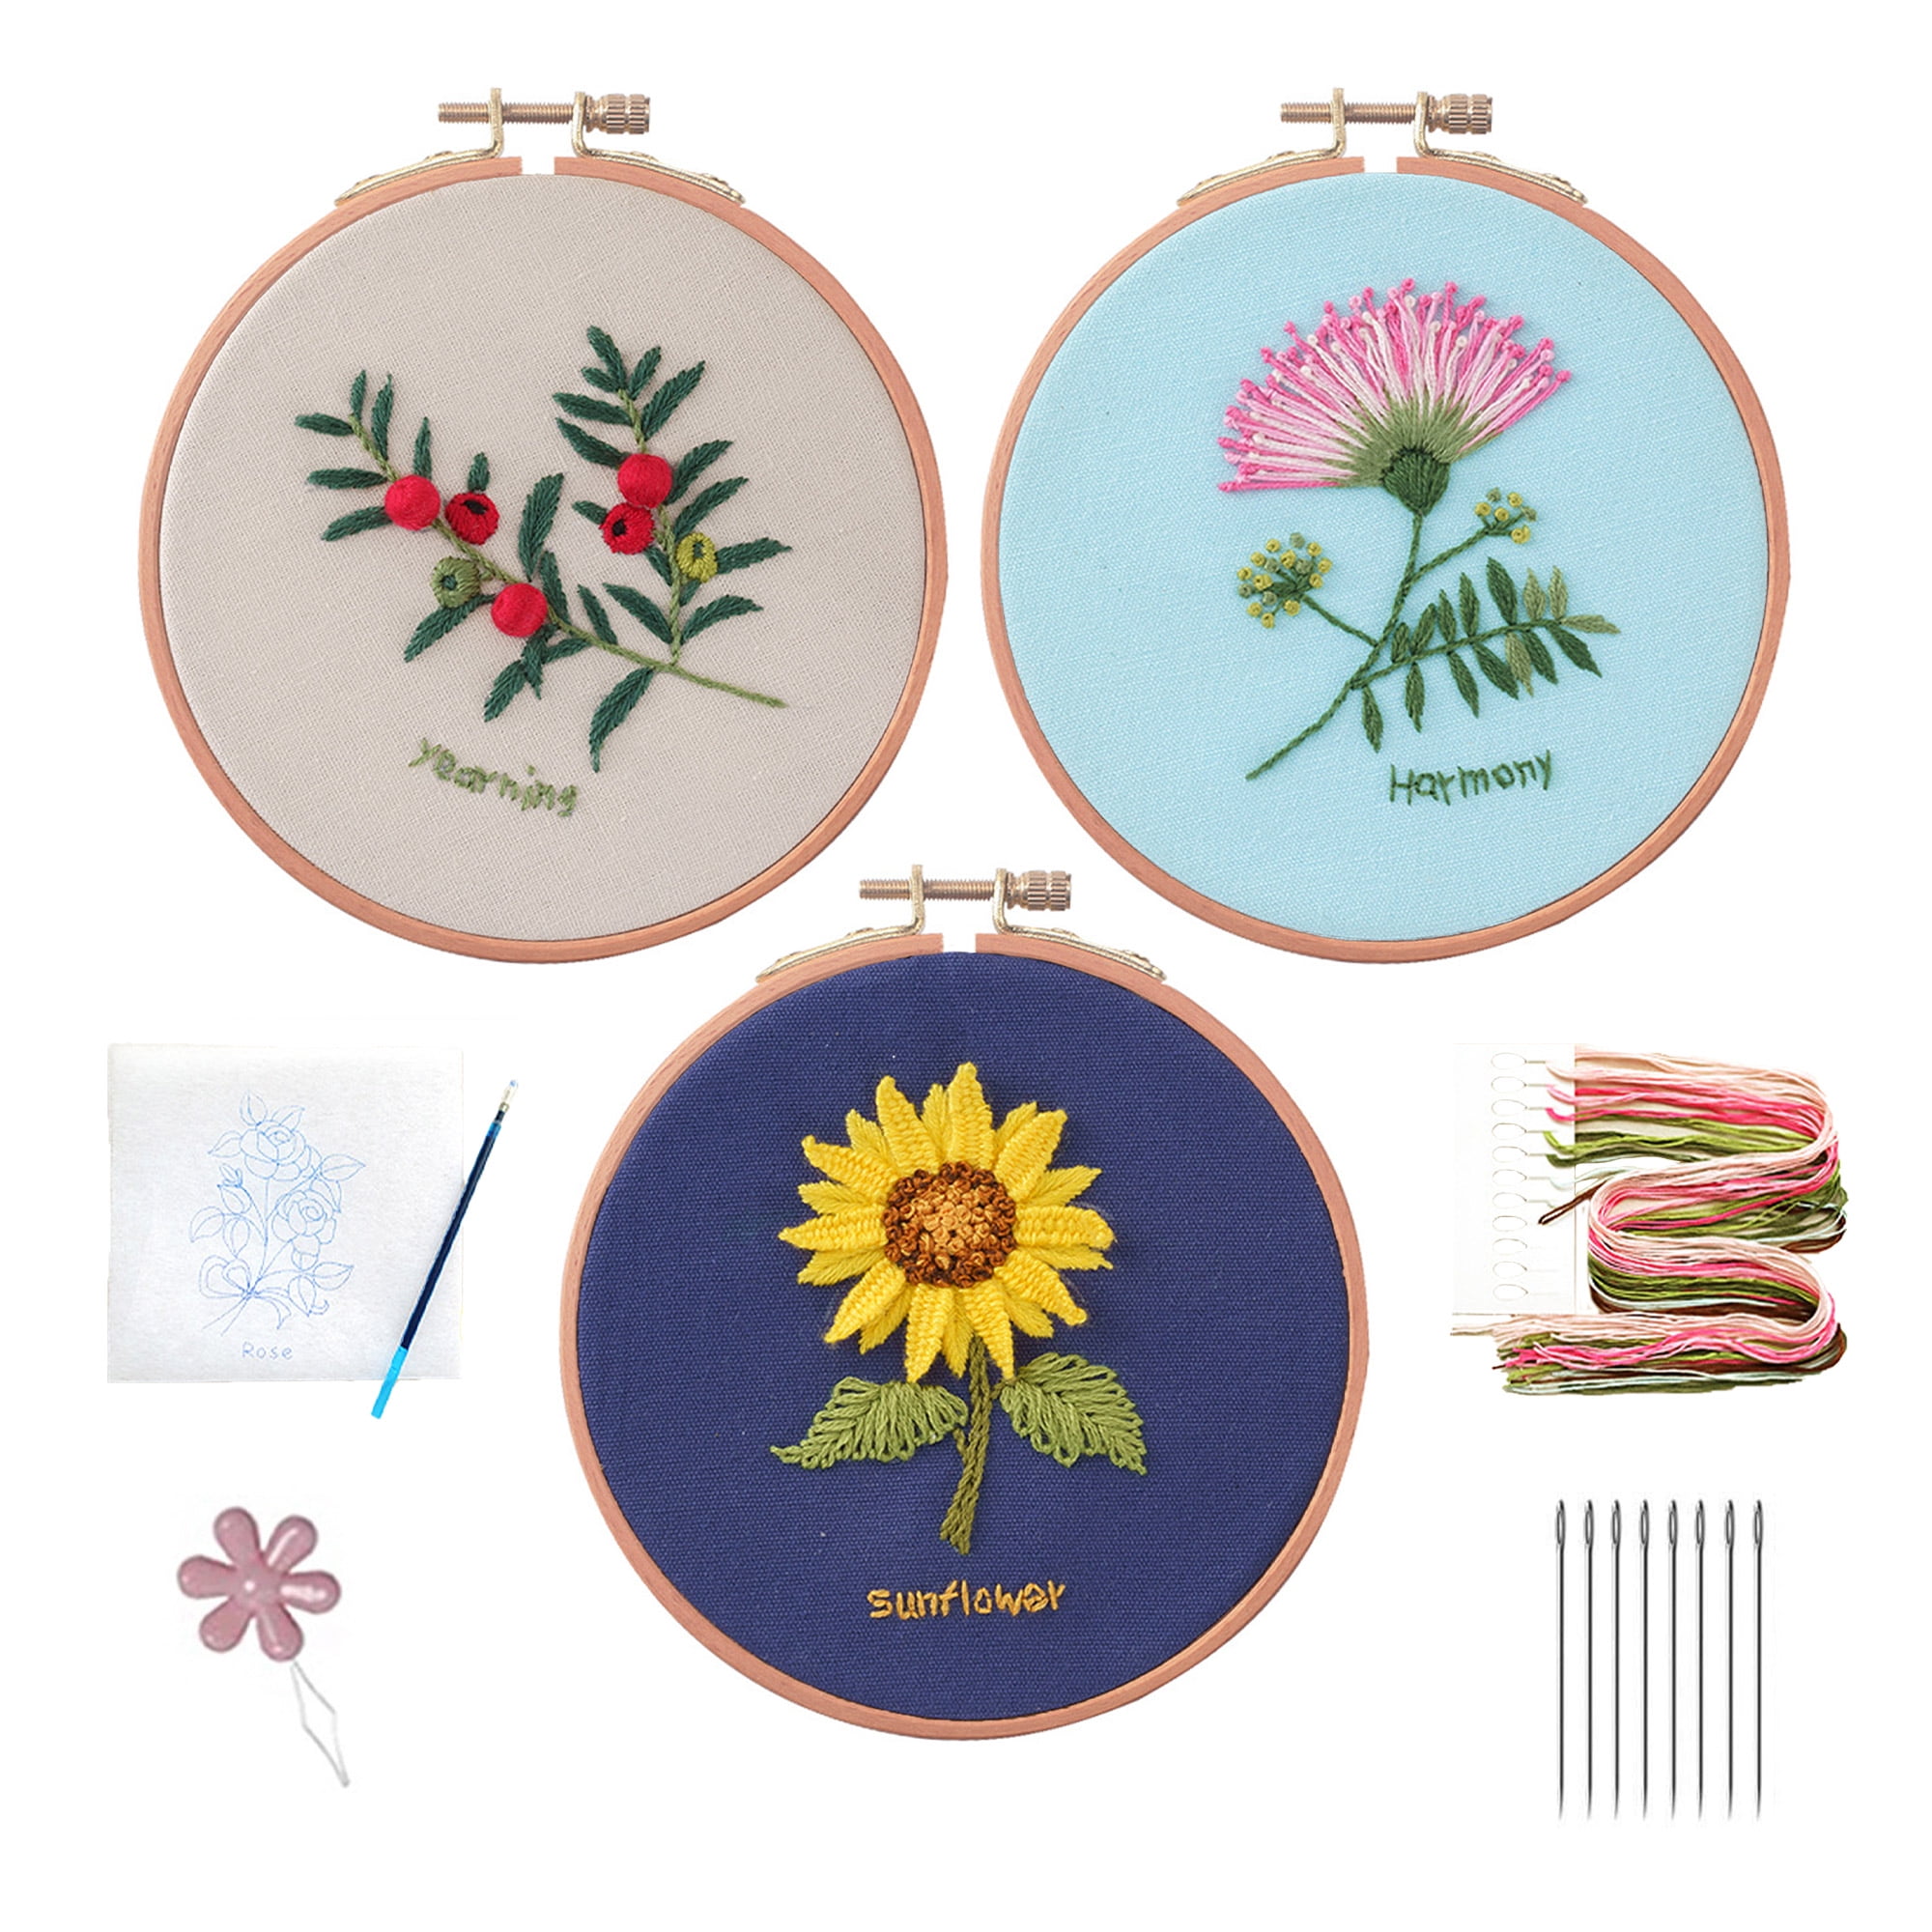 Blingpainting Floral Embroidery Kit for Beginners,Plant Pattern Sunflower  Cross Stitch Kits Set , Including Stamped Embroidery Cloth with Embroidery  Hoops, Color Threads and Tools 